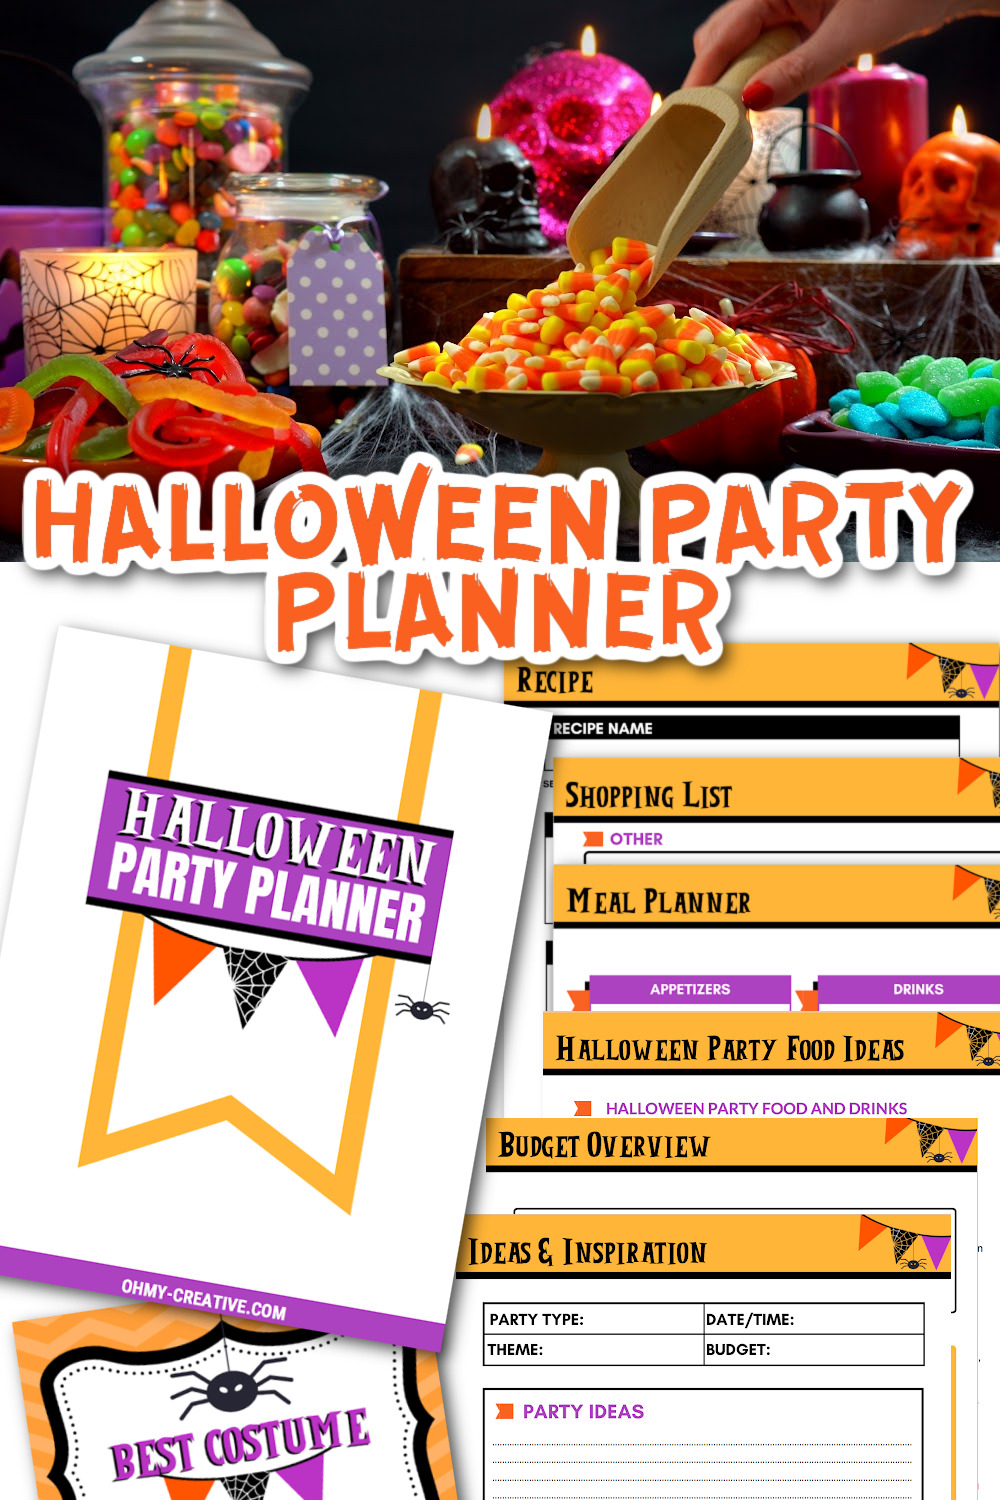 Top image is a table of Halloween candies with images of the Halloween party planner below.